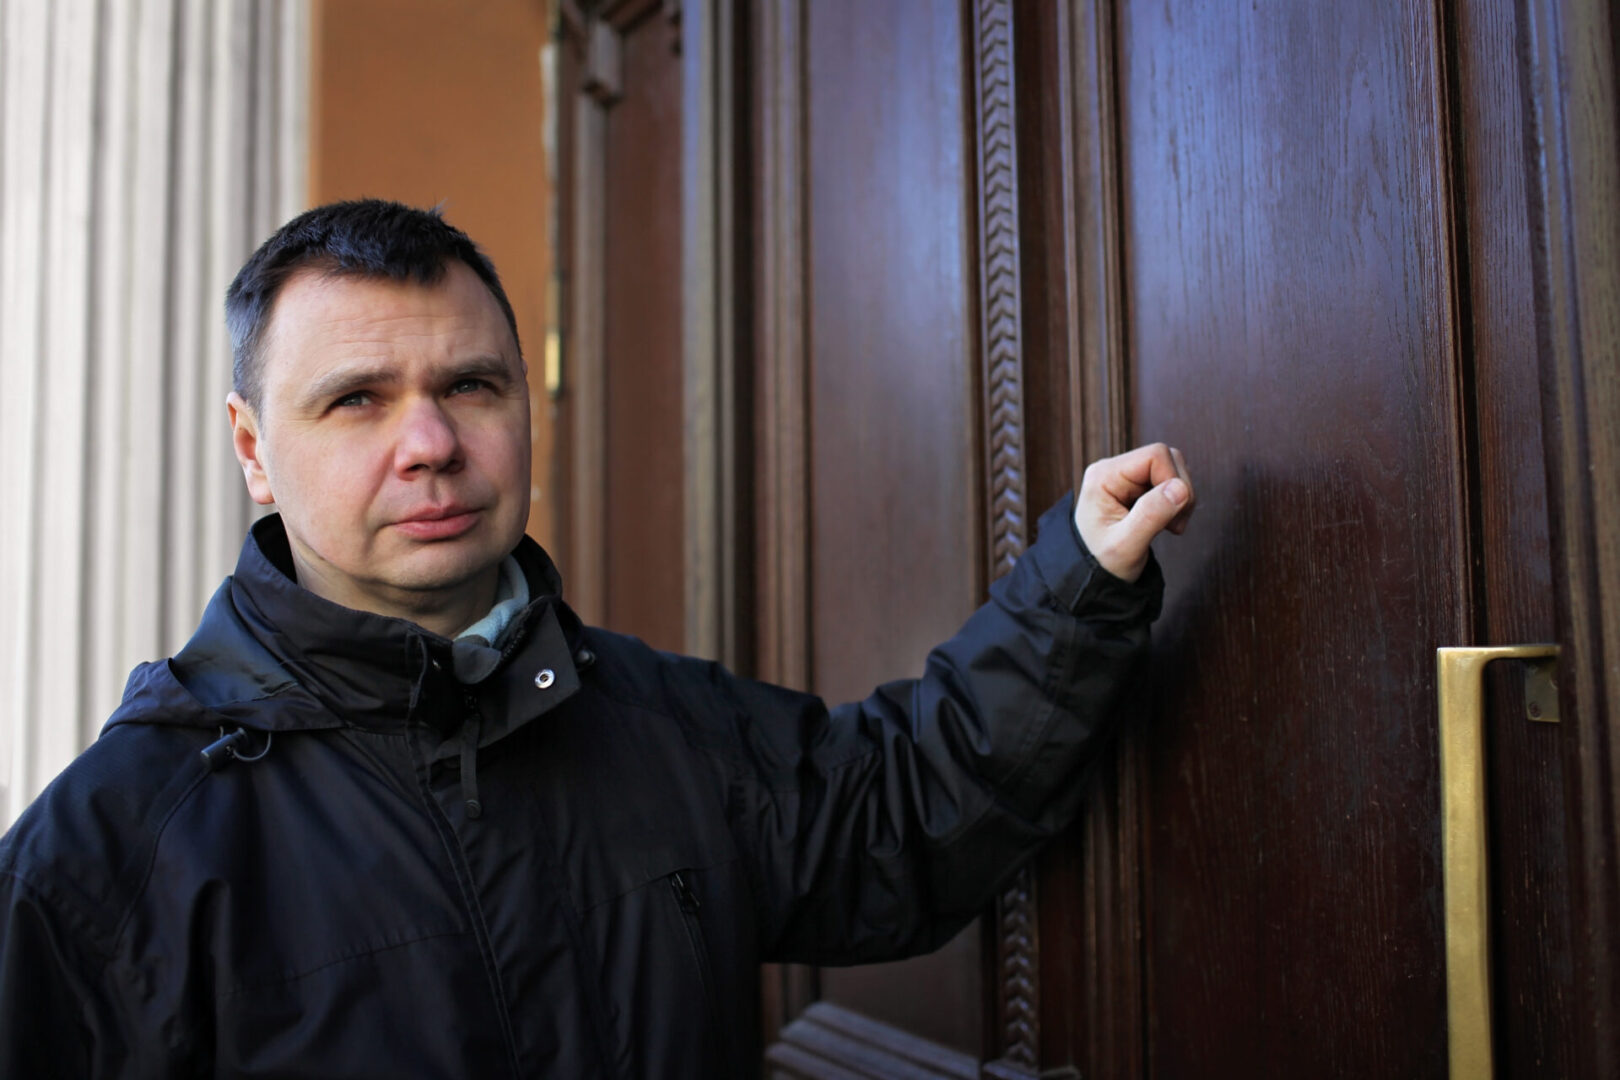 A man in black jacket holding on to door handle.